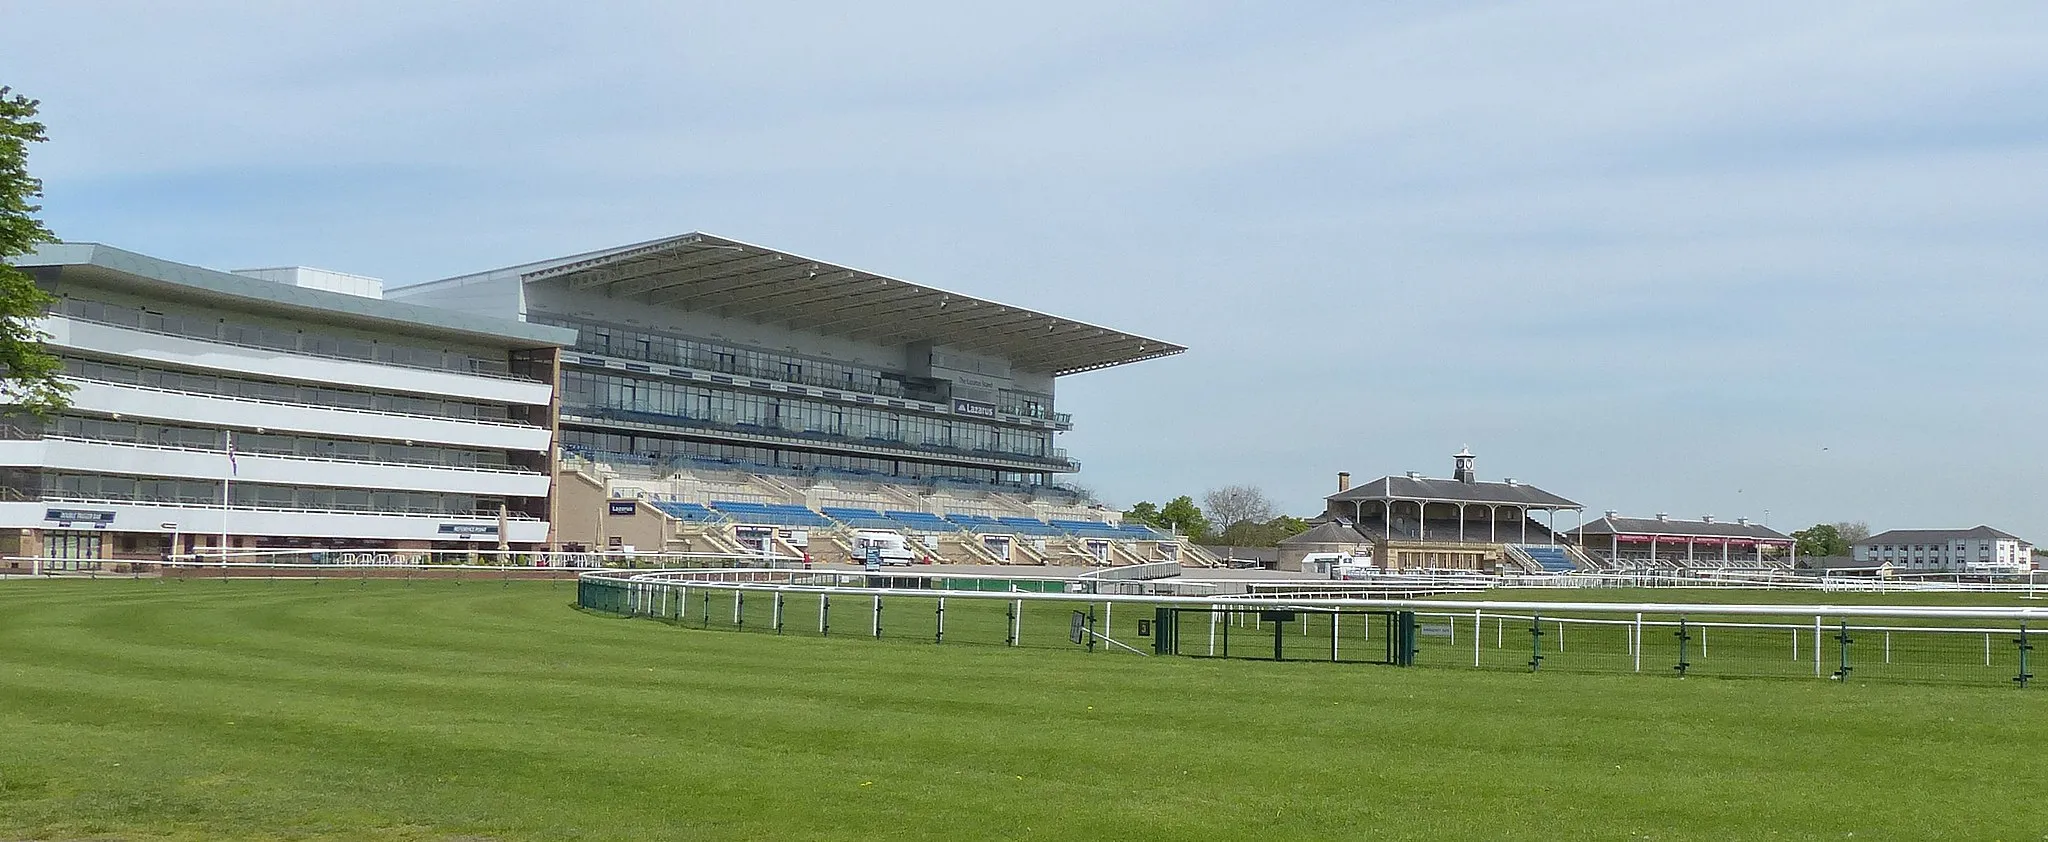 Photo showing: The Grandstand and racecourse at Doncaster. Home of the St. Leger.